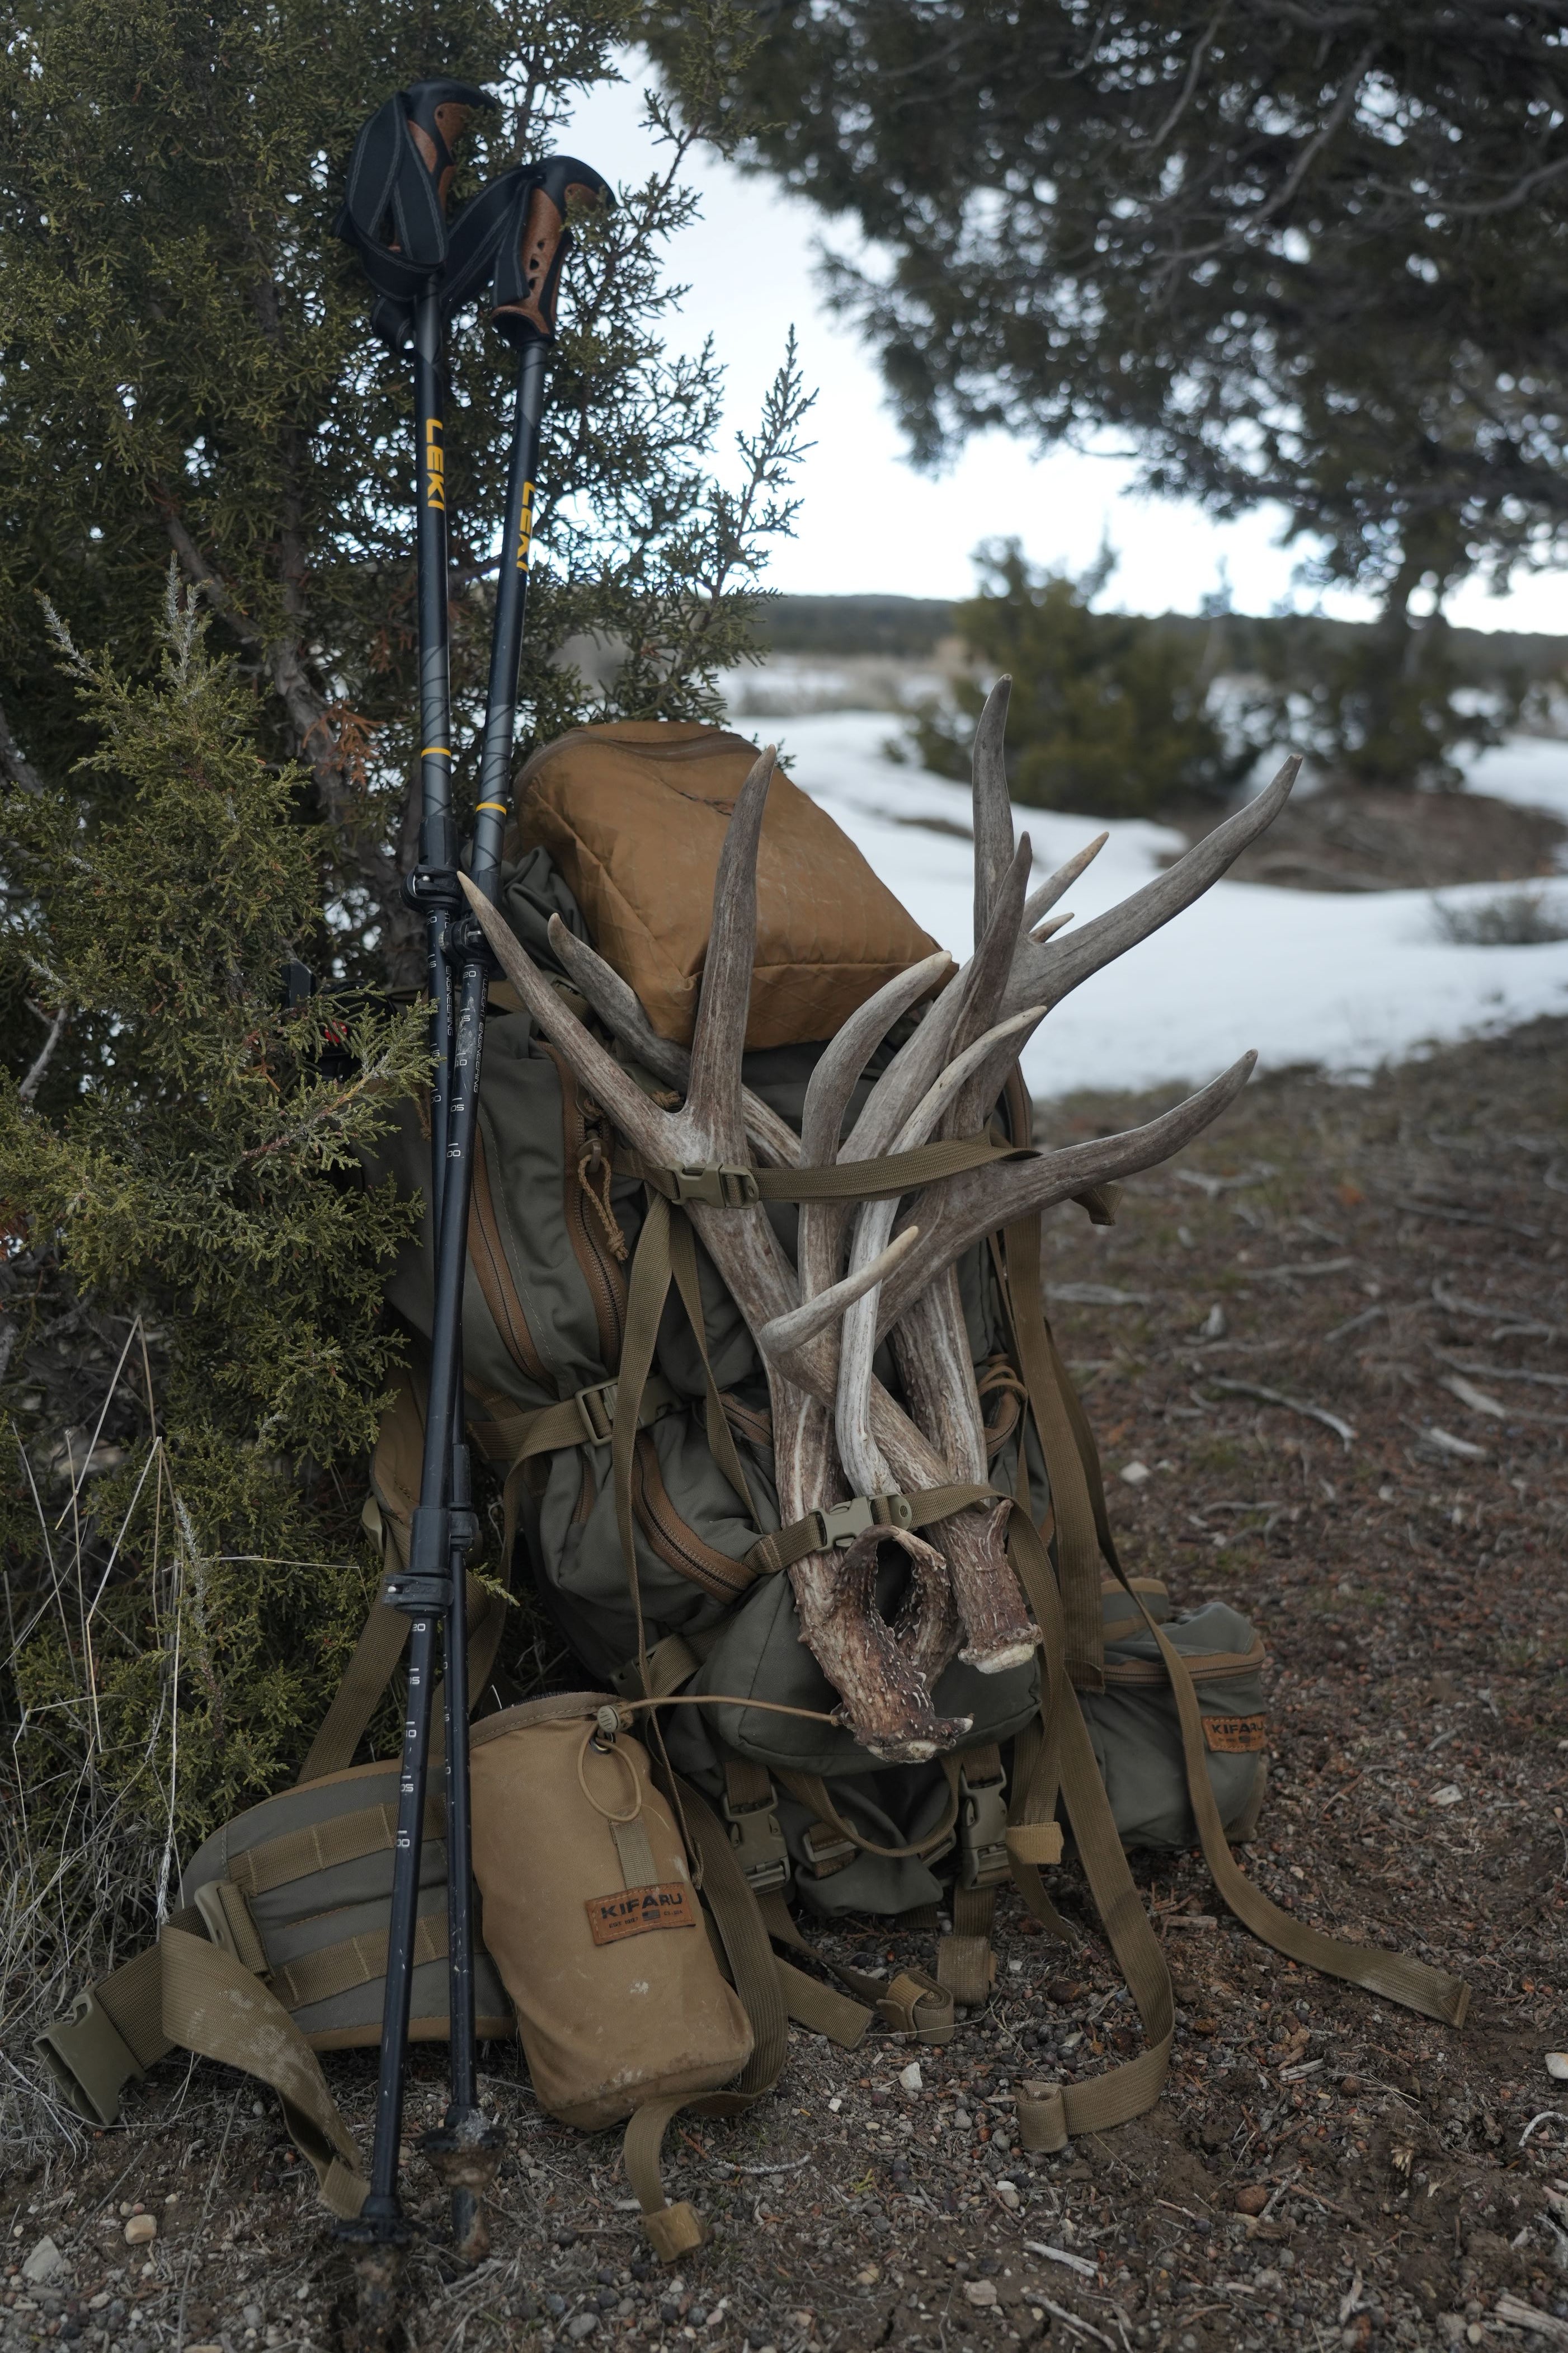 A hike bag full of other stuff and horns in it